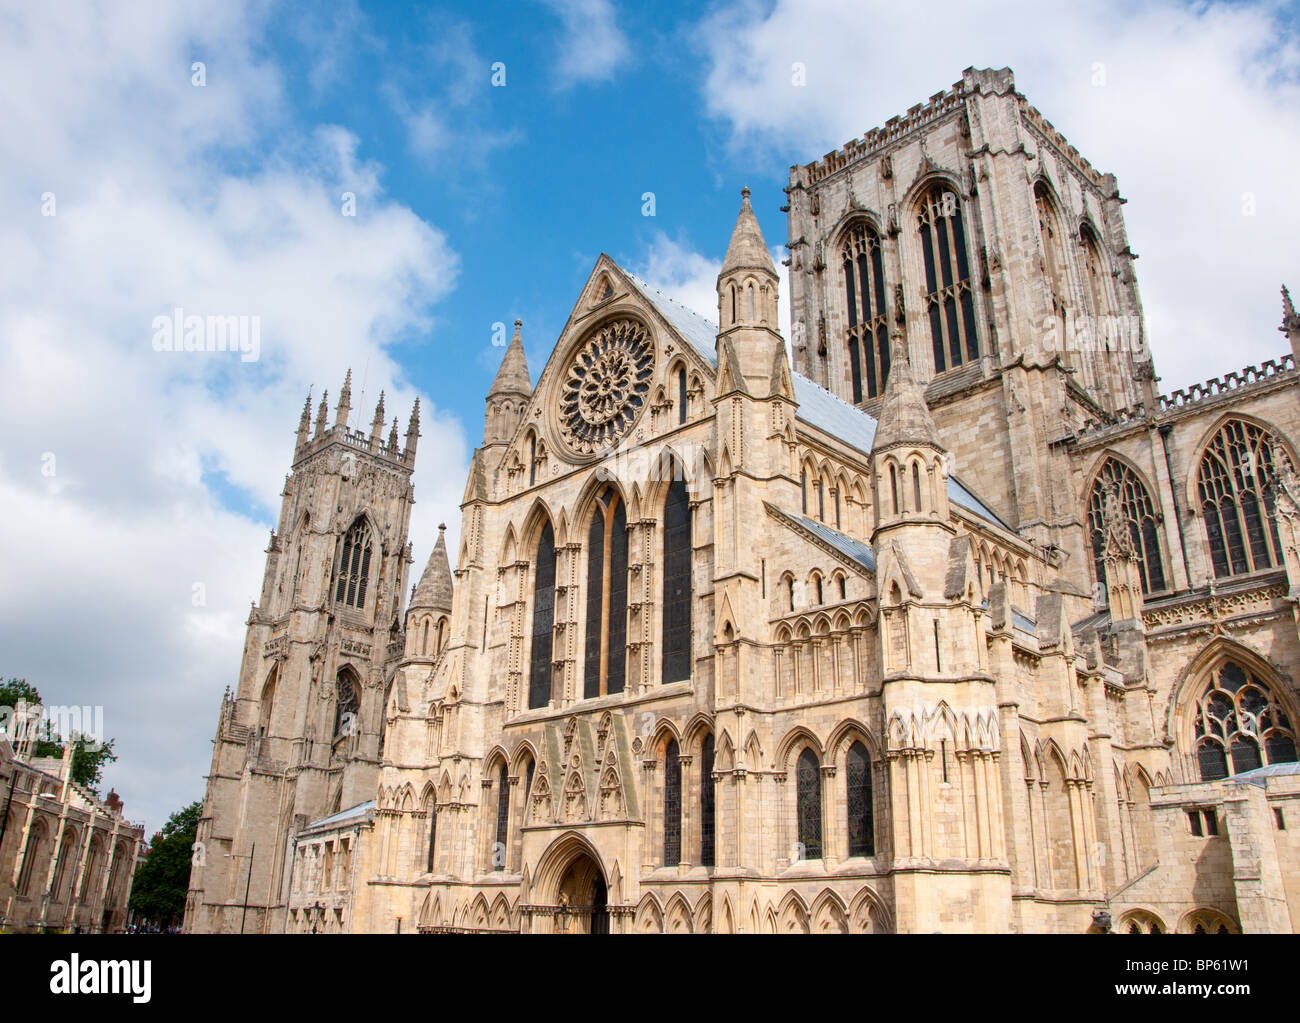 York minster Cathedral, England Stock Photo